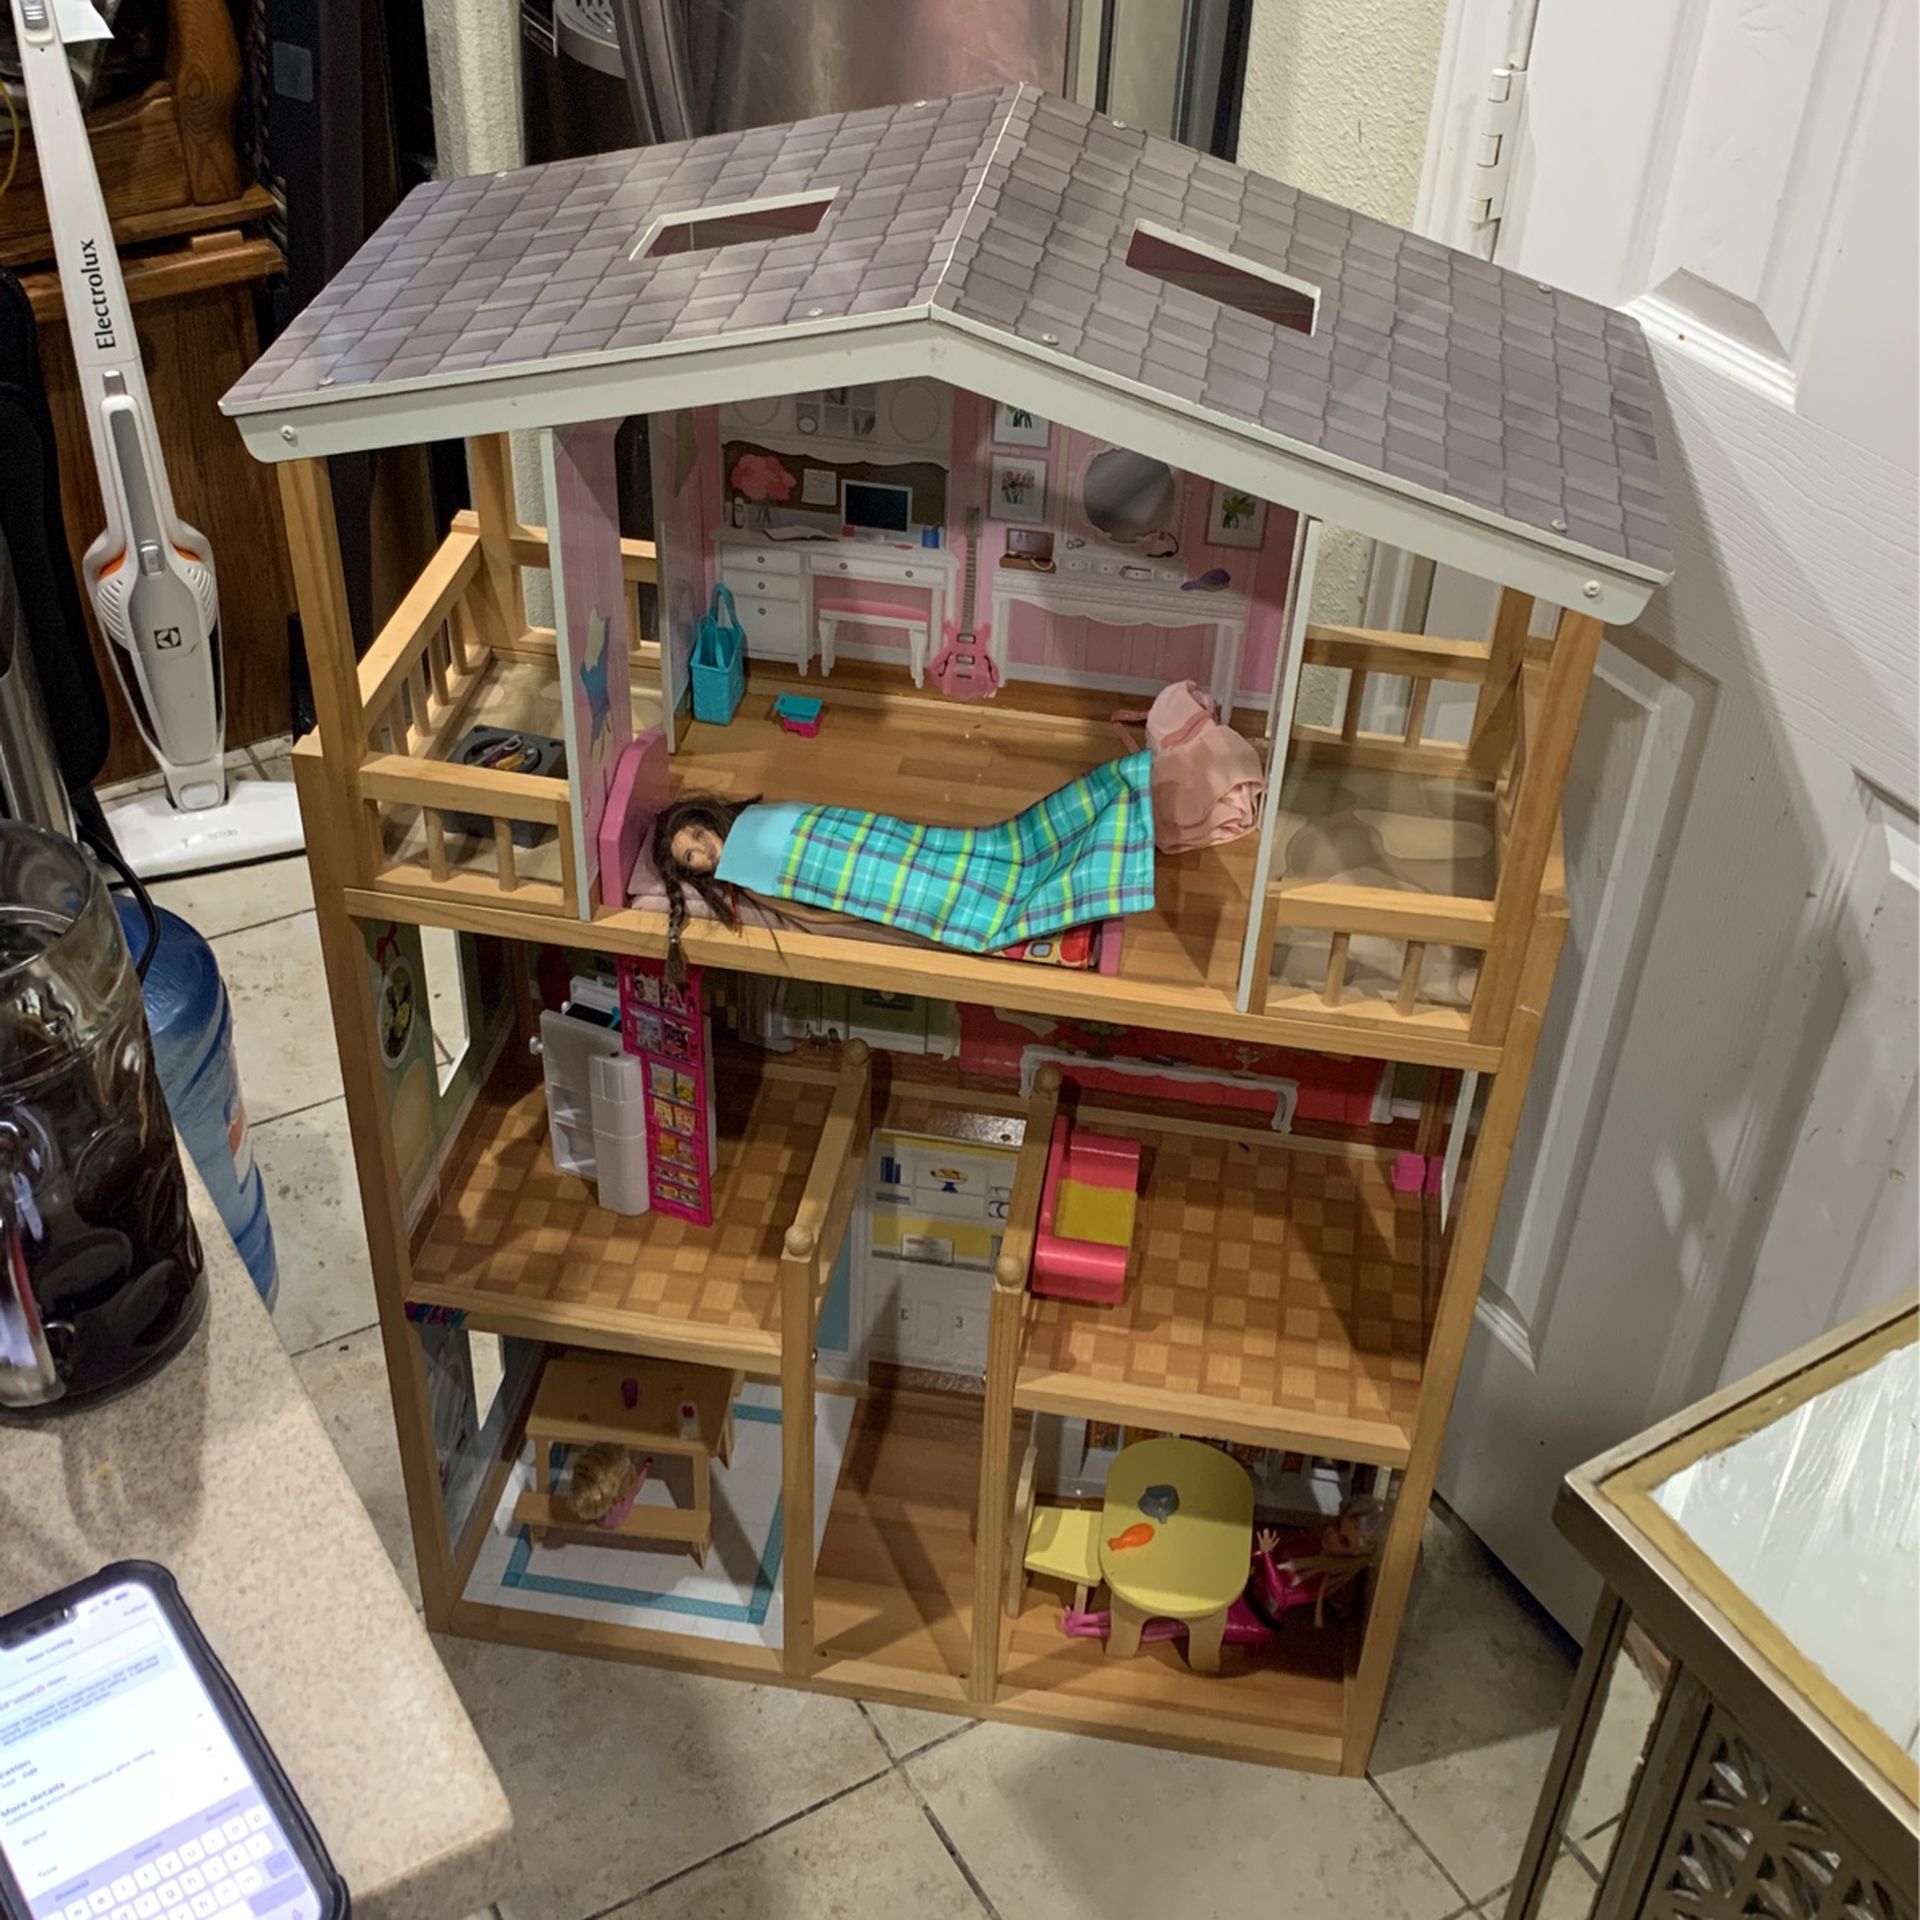 Barbie Large Doll/playhouse With Accessories 3dolls.couch,coffee table BBQ Pit Clothes Etc 3floors